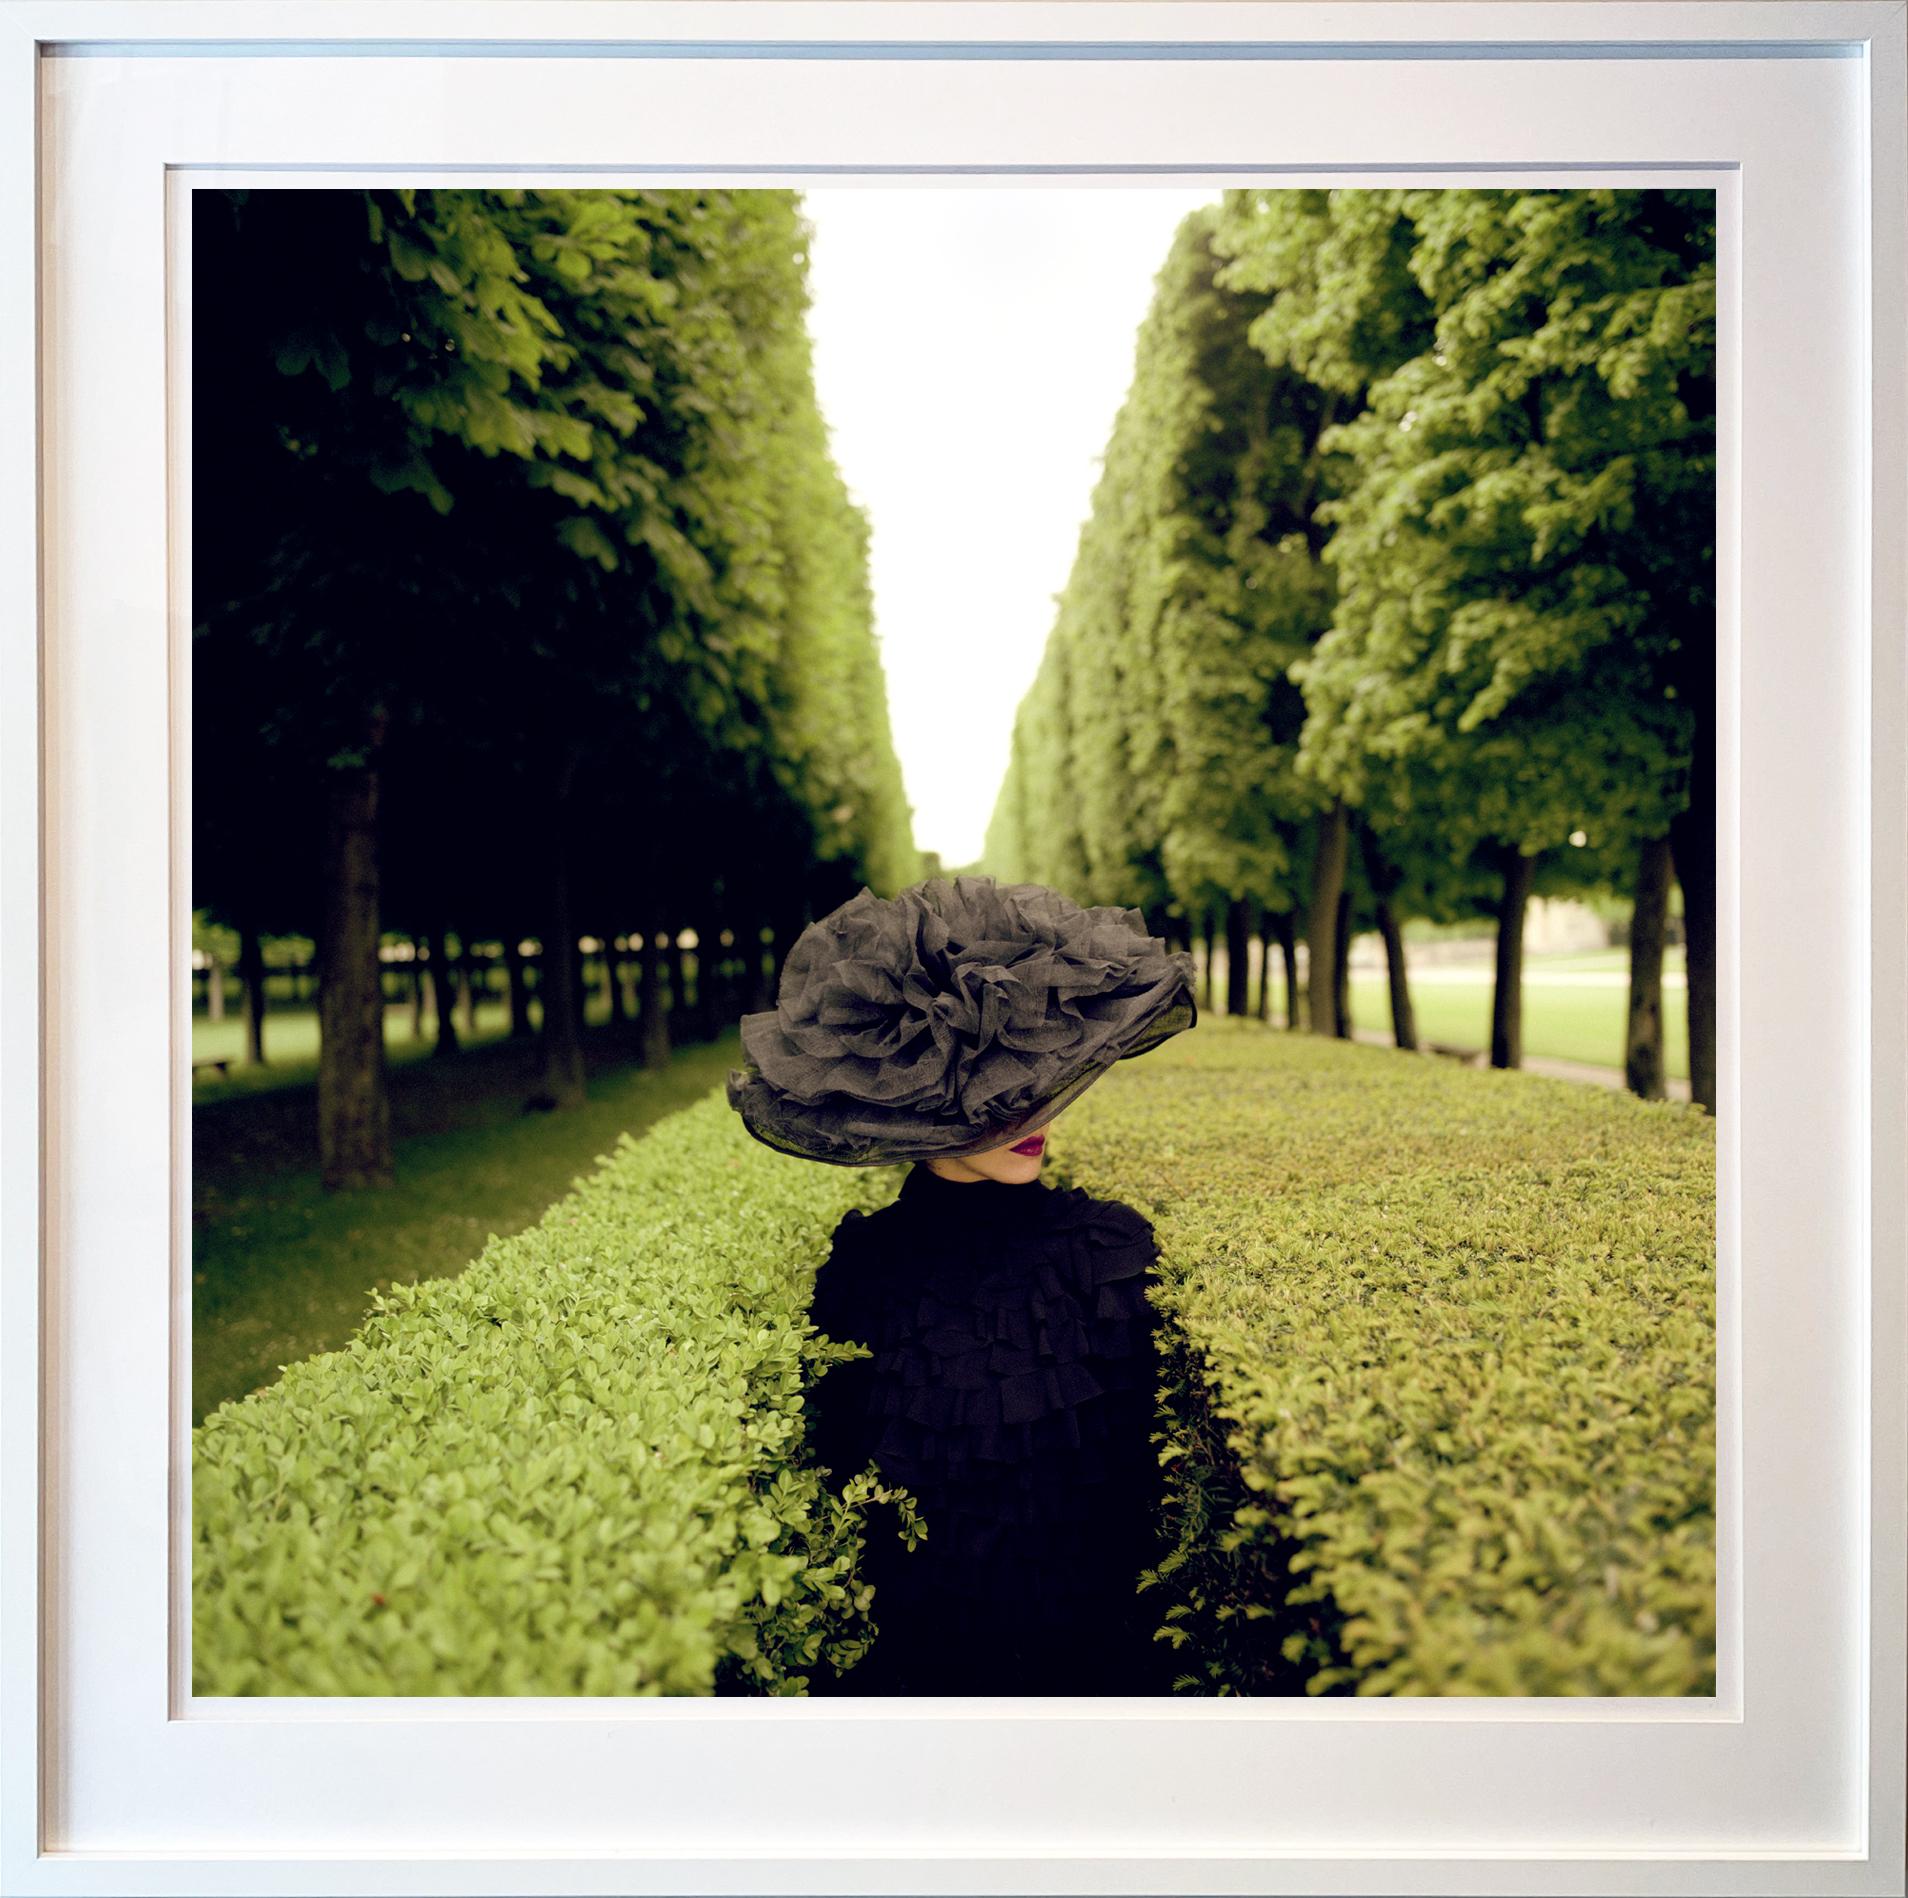 Woman with Hat Between Hedges, Parc de Sceaux, France - 50 x 50 inches framed - Photograph by Rodney Smith